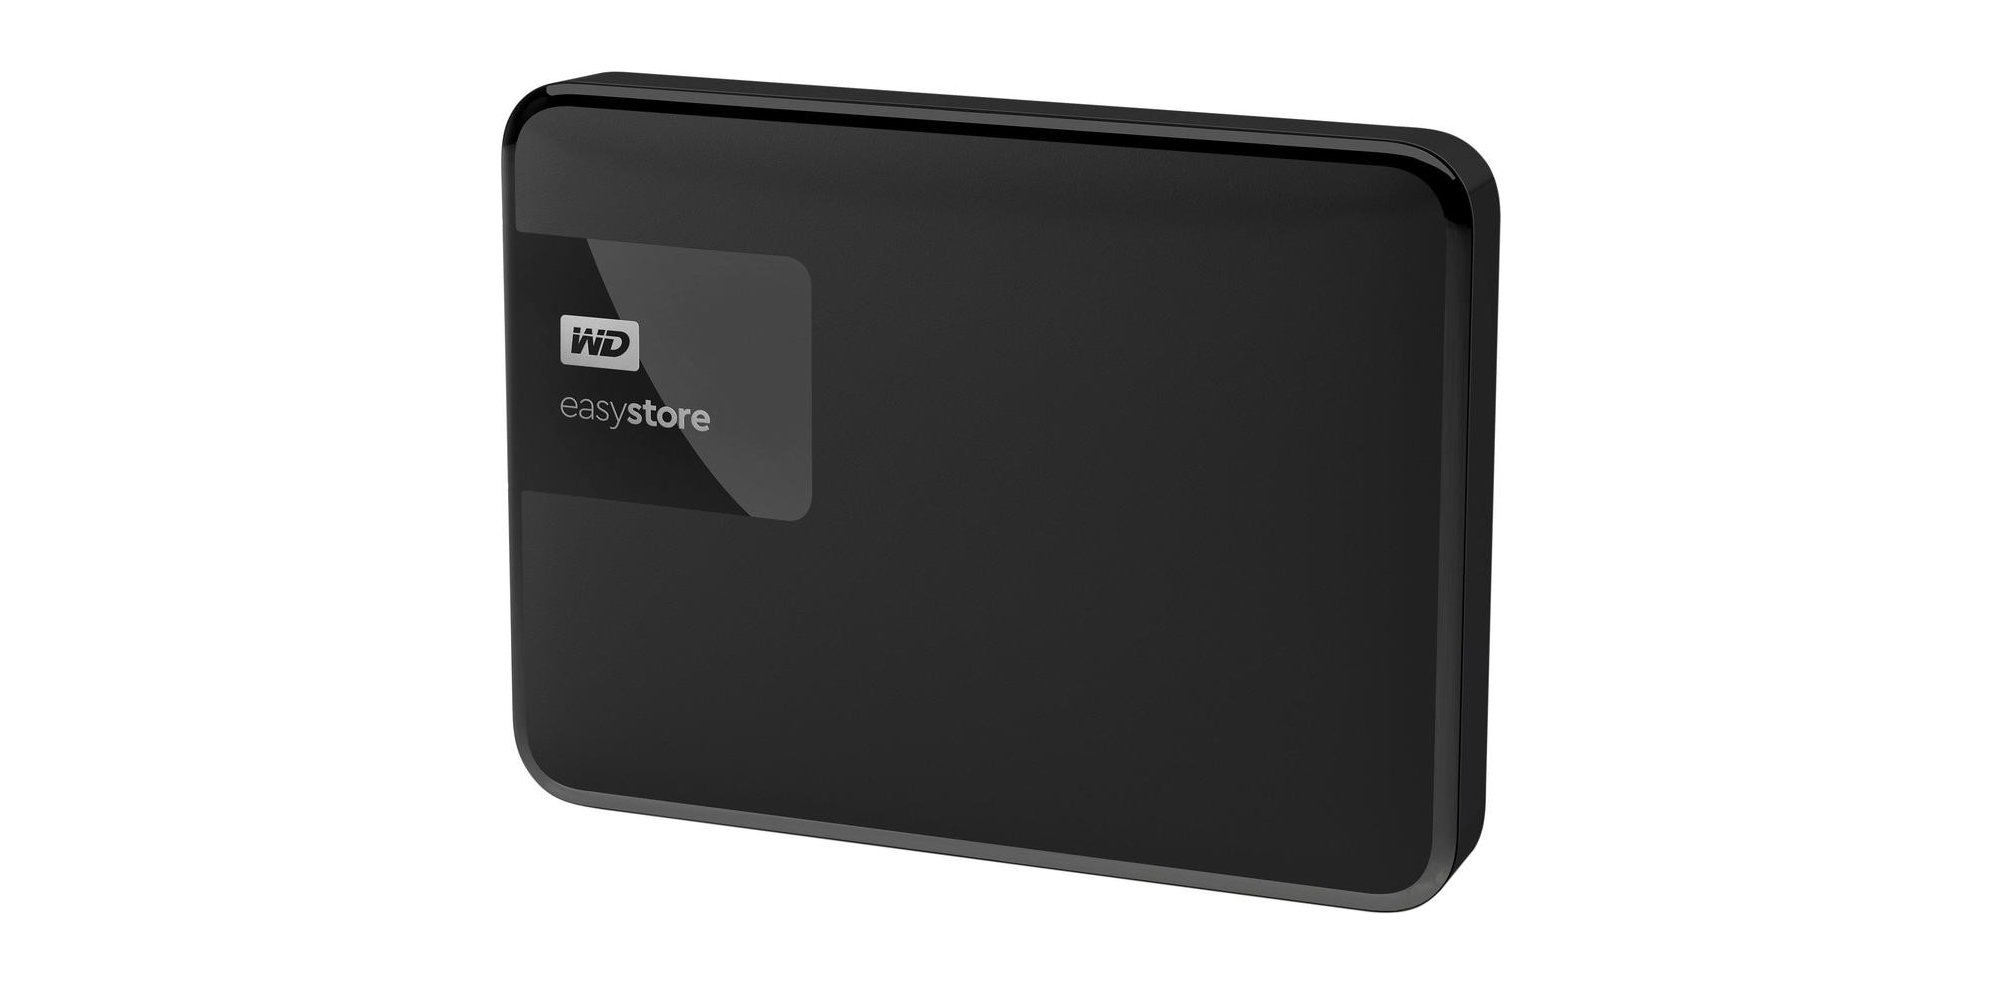 external hard drive that works with mac and pc simultaneously